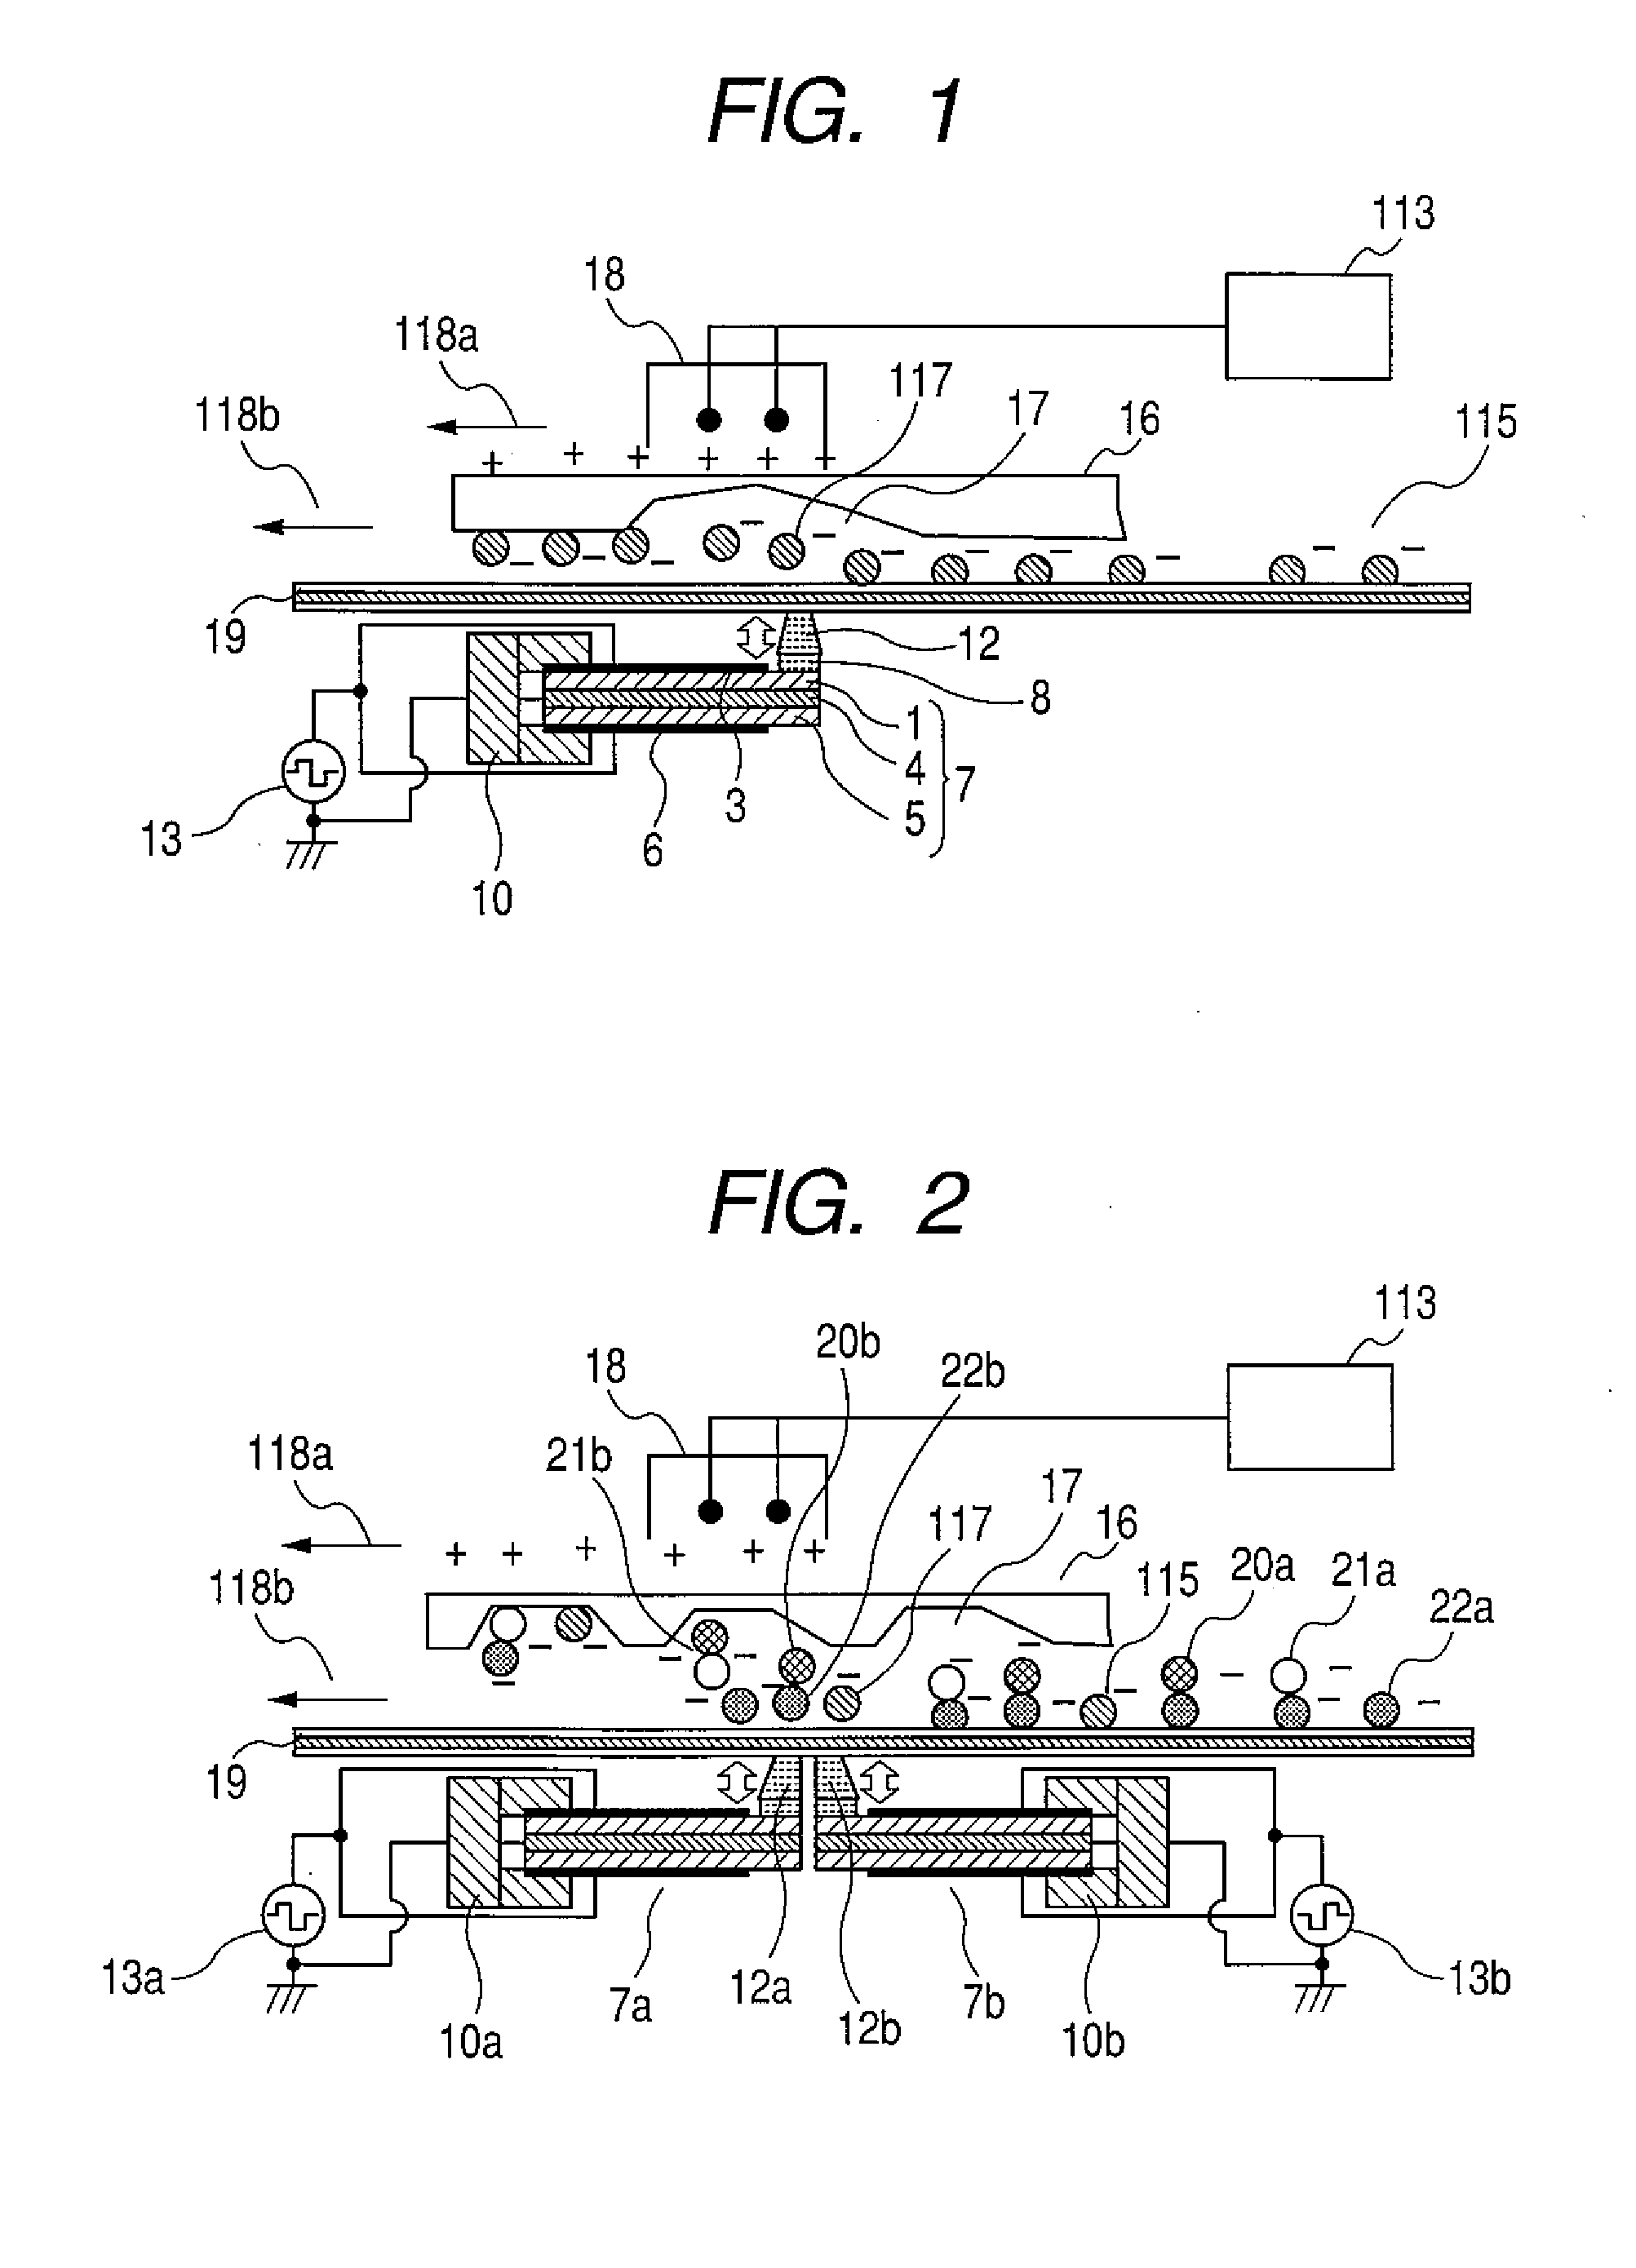 Transfer apparatus, method of manufacturing the transfer apparatus and image forming apparatus using the transfer apparatus